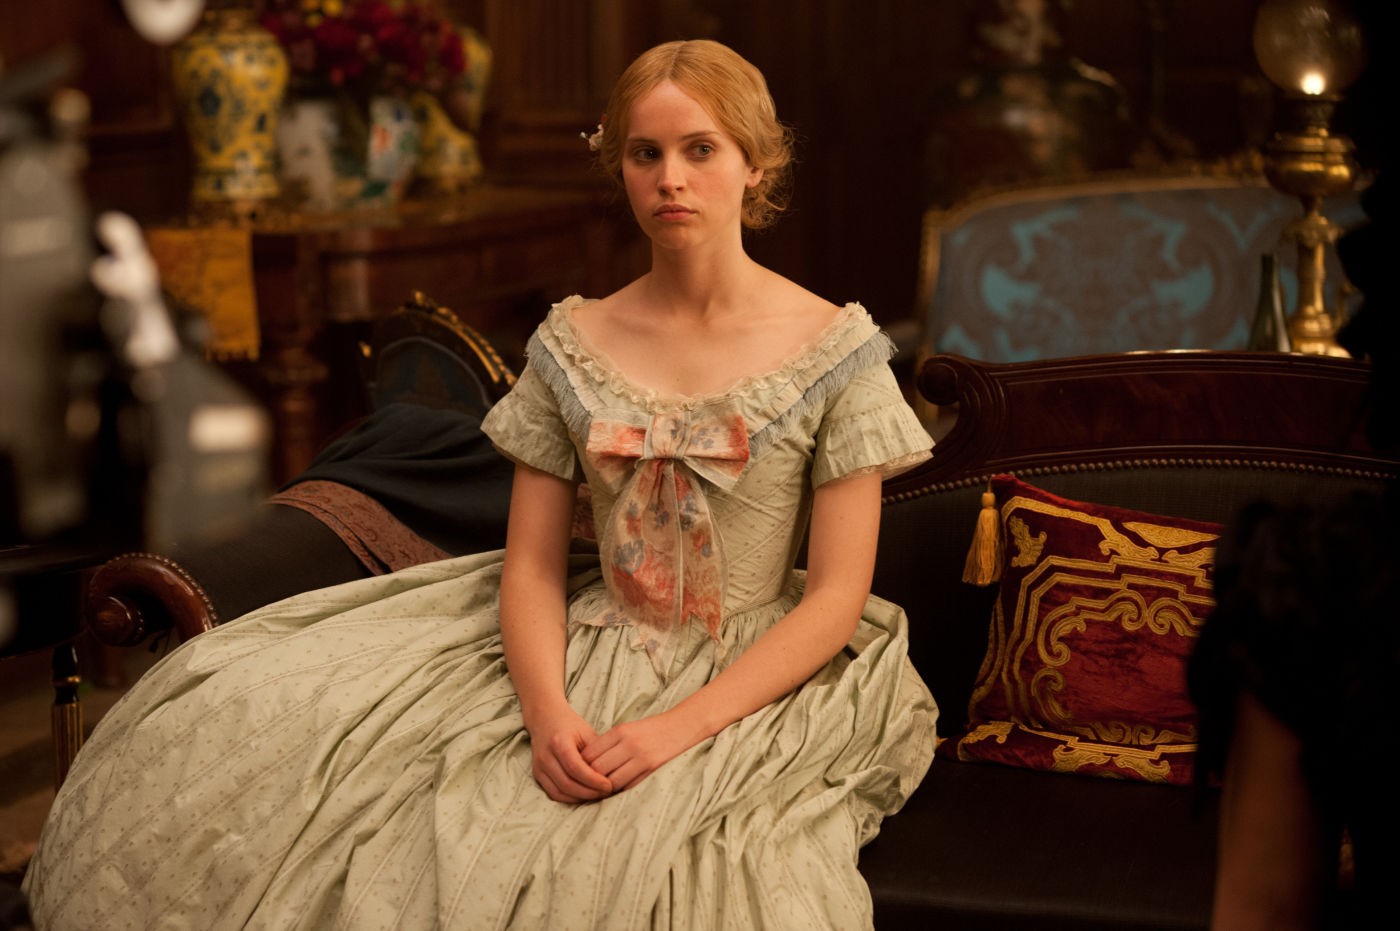 THE INVISIBLE WOMAN Explores Interesting and Unusual Subject Matter